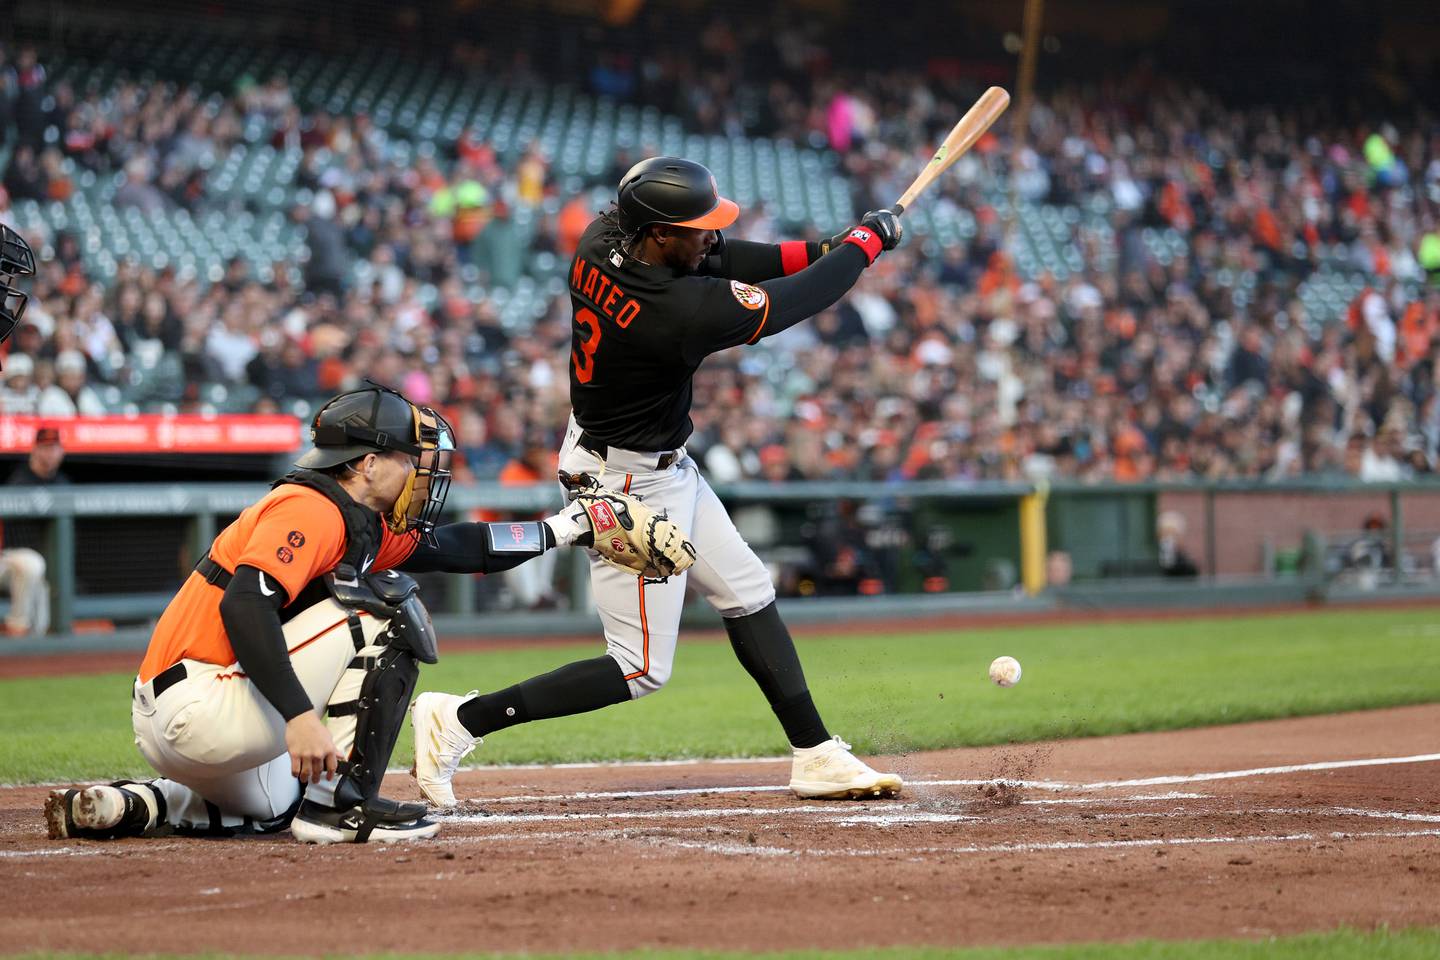 Jorge Mateo #3 of the Baltimore Orioles hits an infield single that scored a run against the San Francisco Giants in the second inning on June 02, 2023 in San Francisco, California.